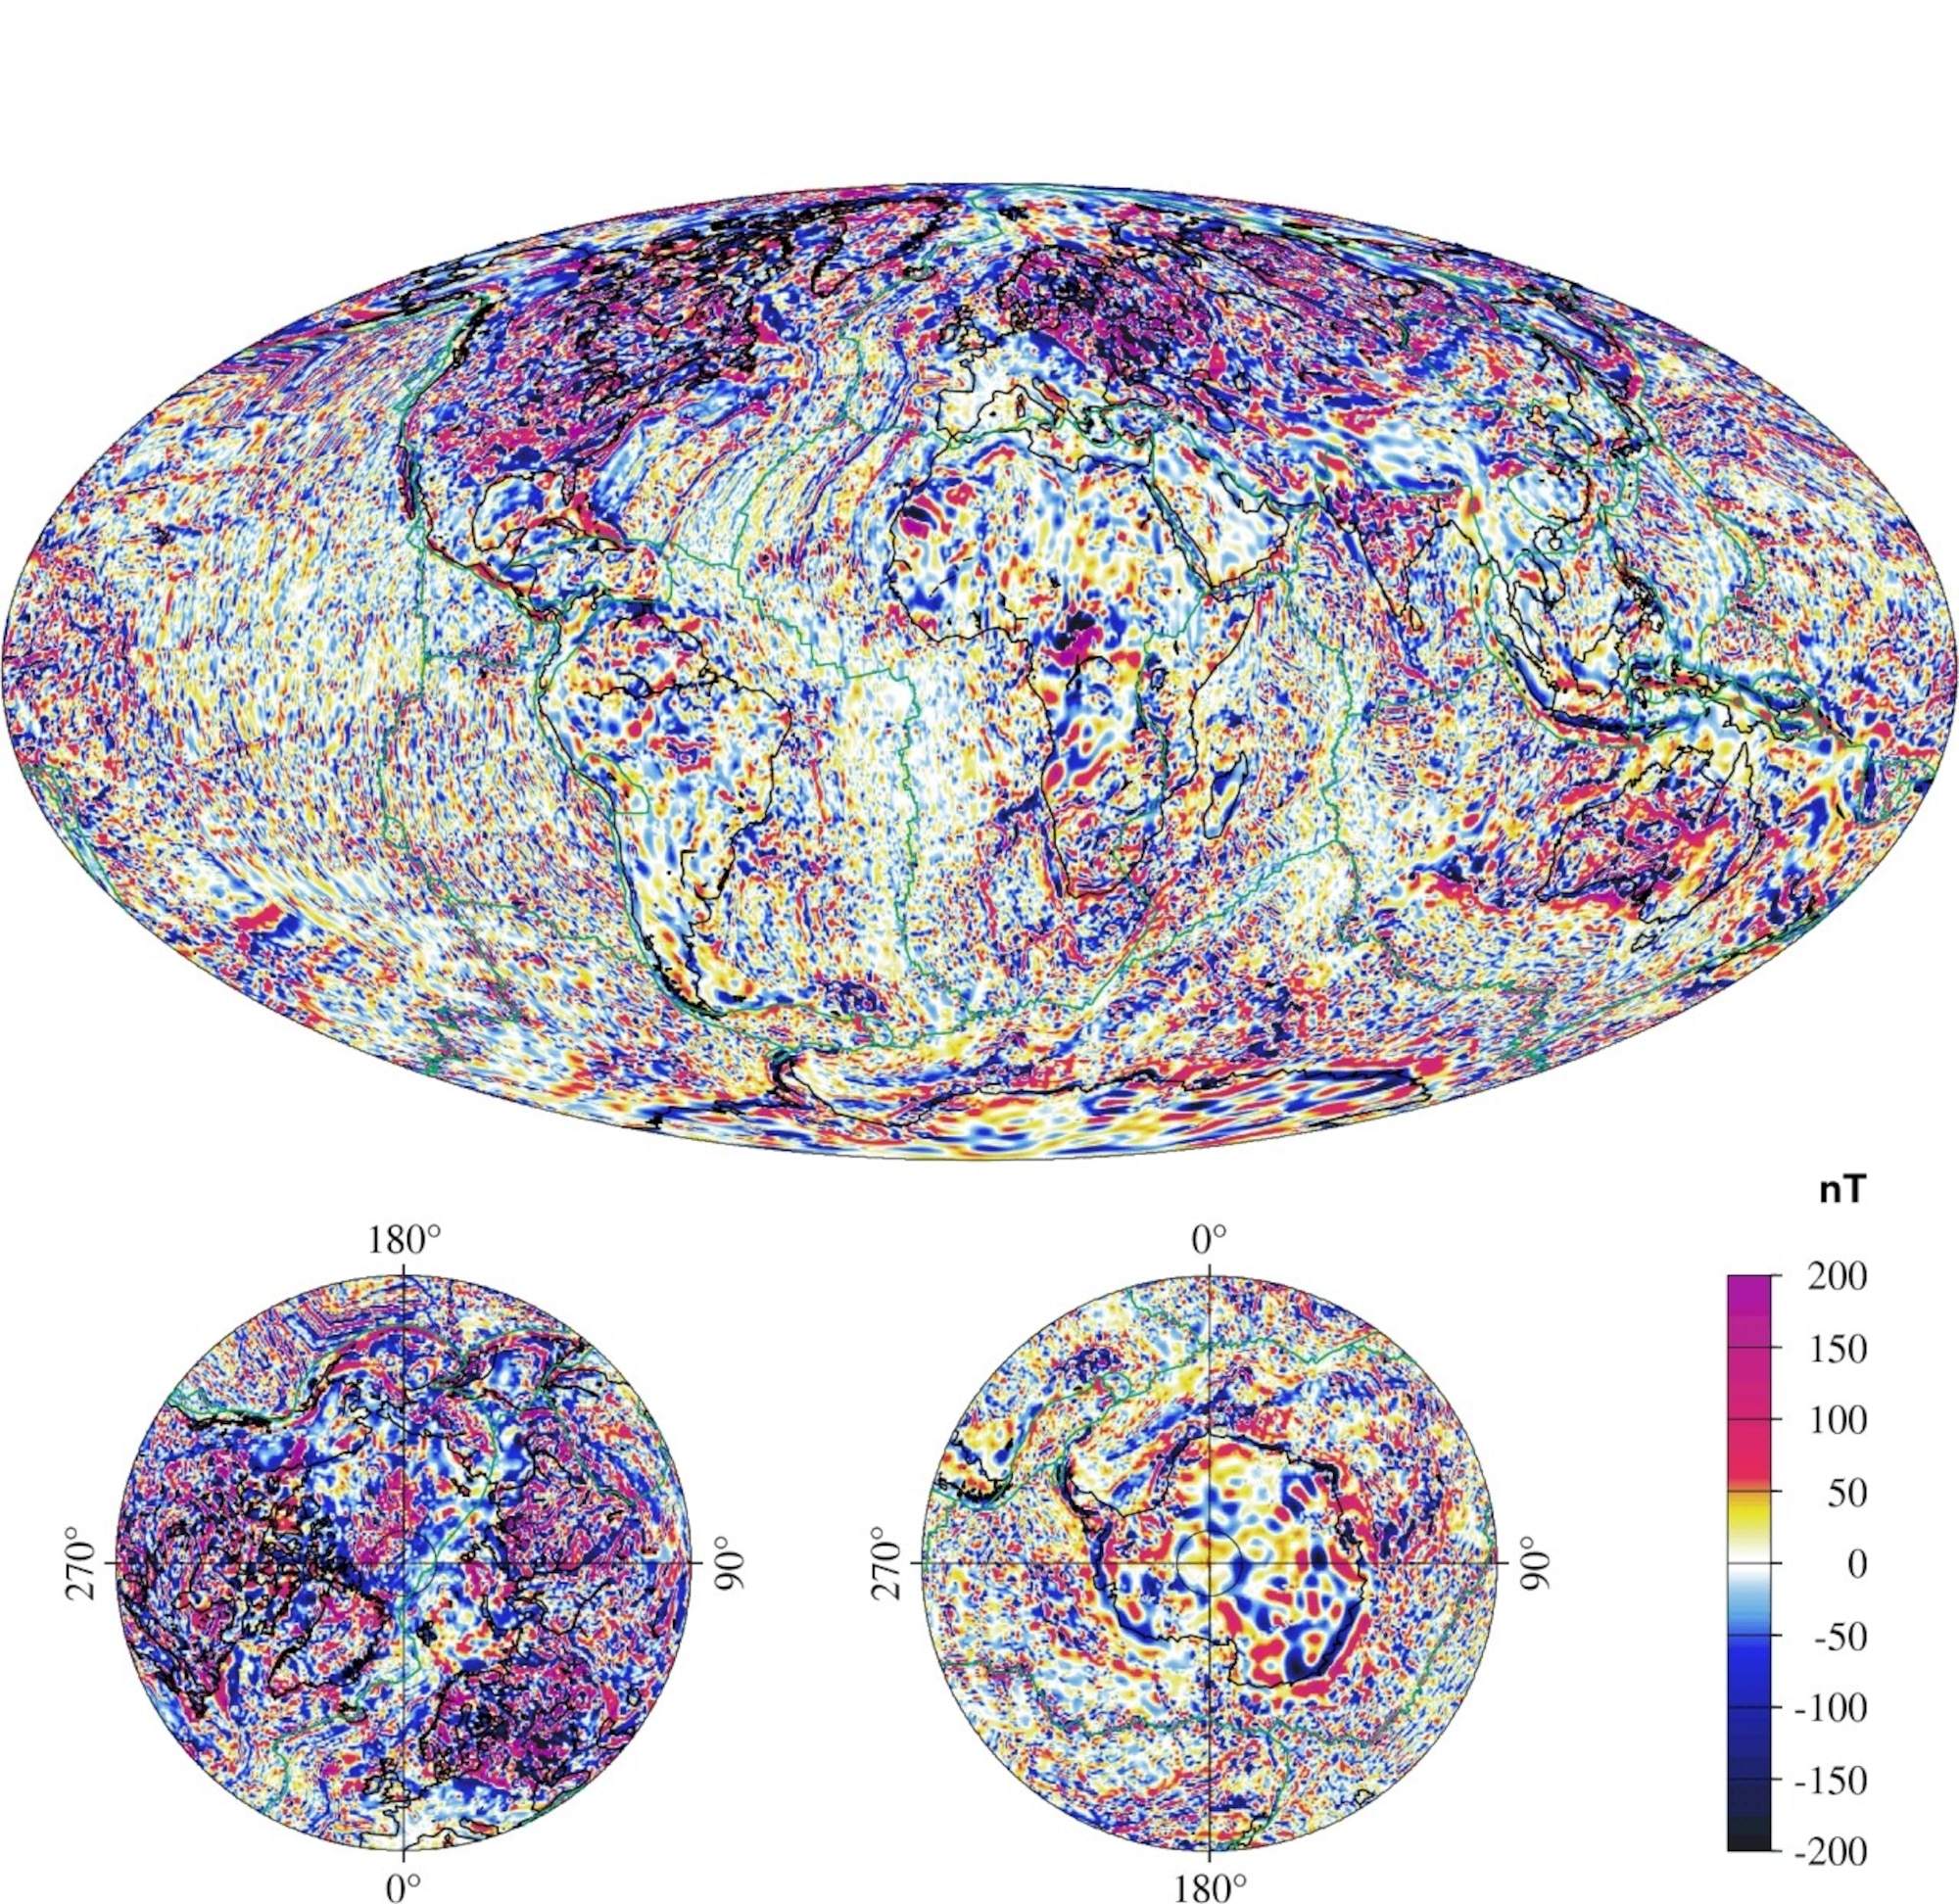 The crustal field, shown here, is weaker than the core field, but is fixed and has features that are useful in non-GPS navigation. The intensity of the fields are measured in nano teslas (nT), shown increasing in strength from blue to red. (Graphic courtesy of NOAA)